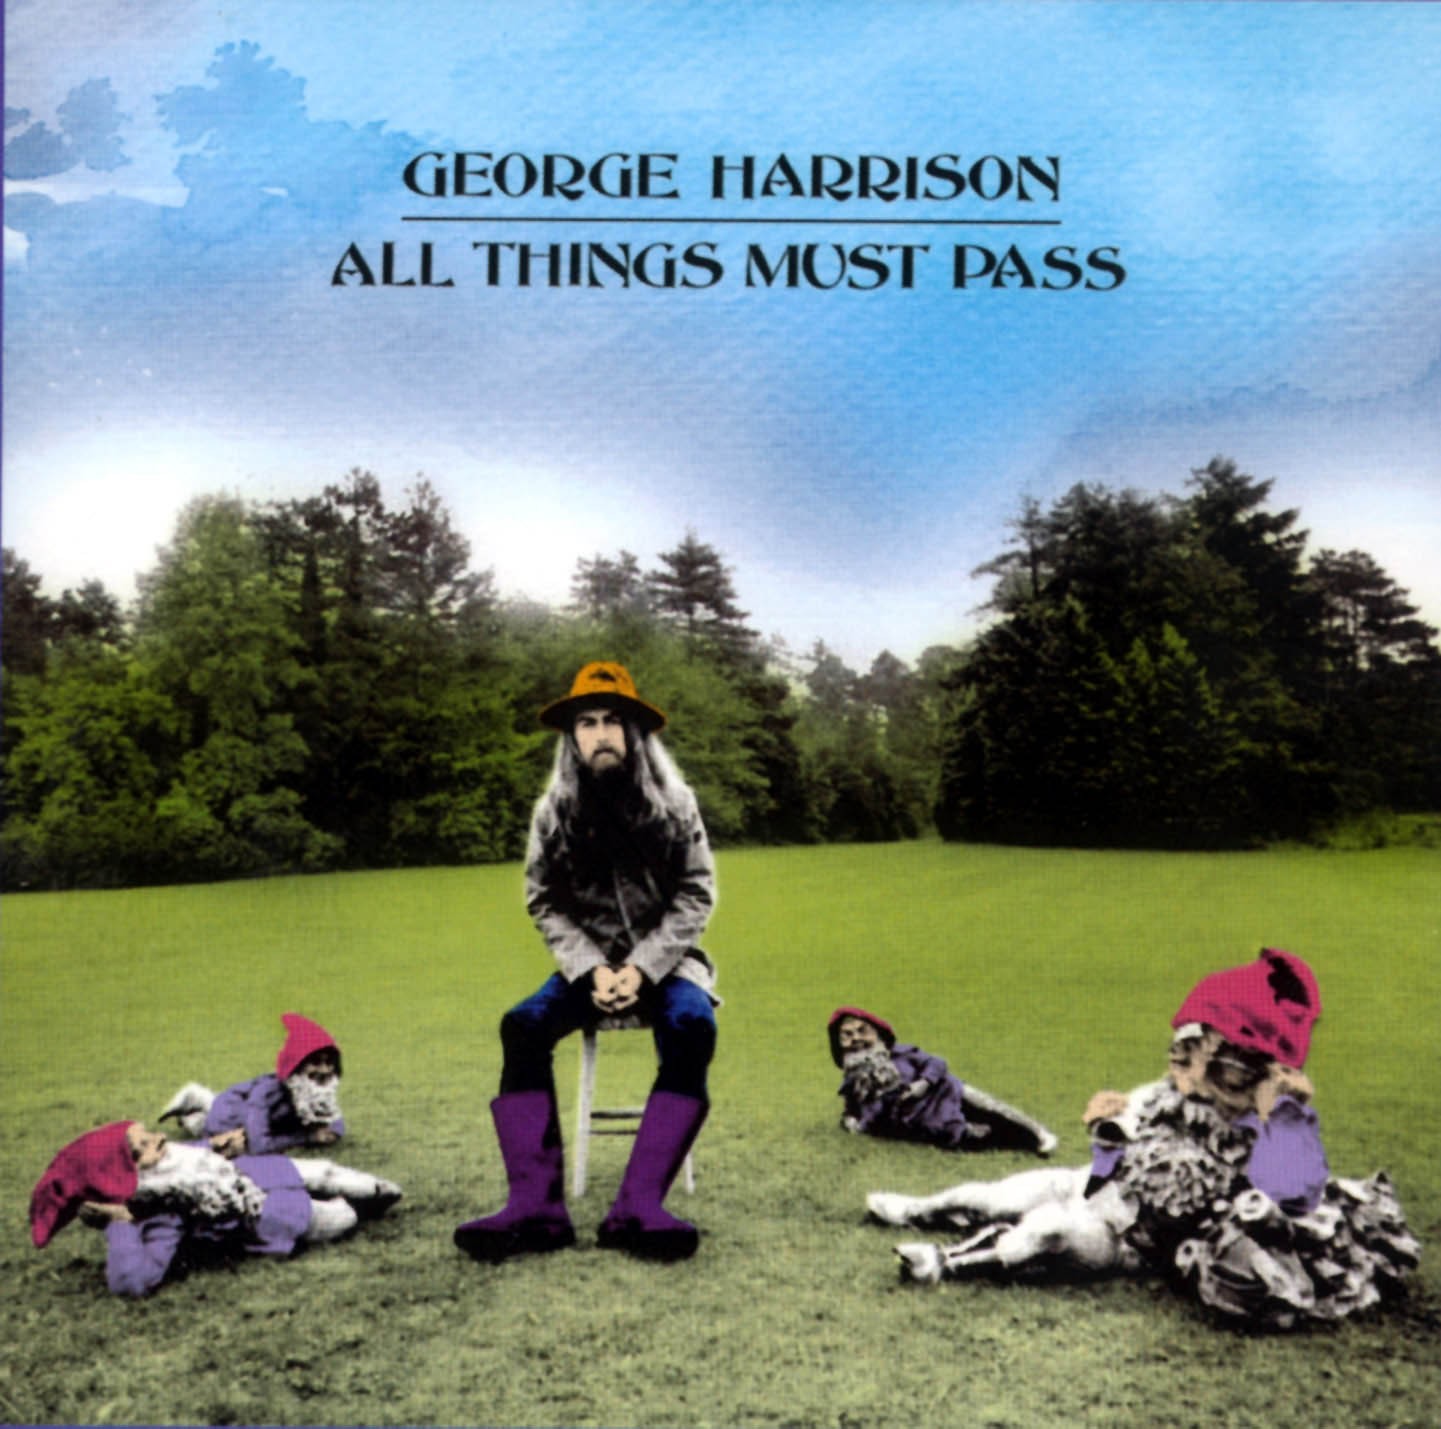 george harrison all things pass